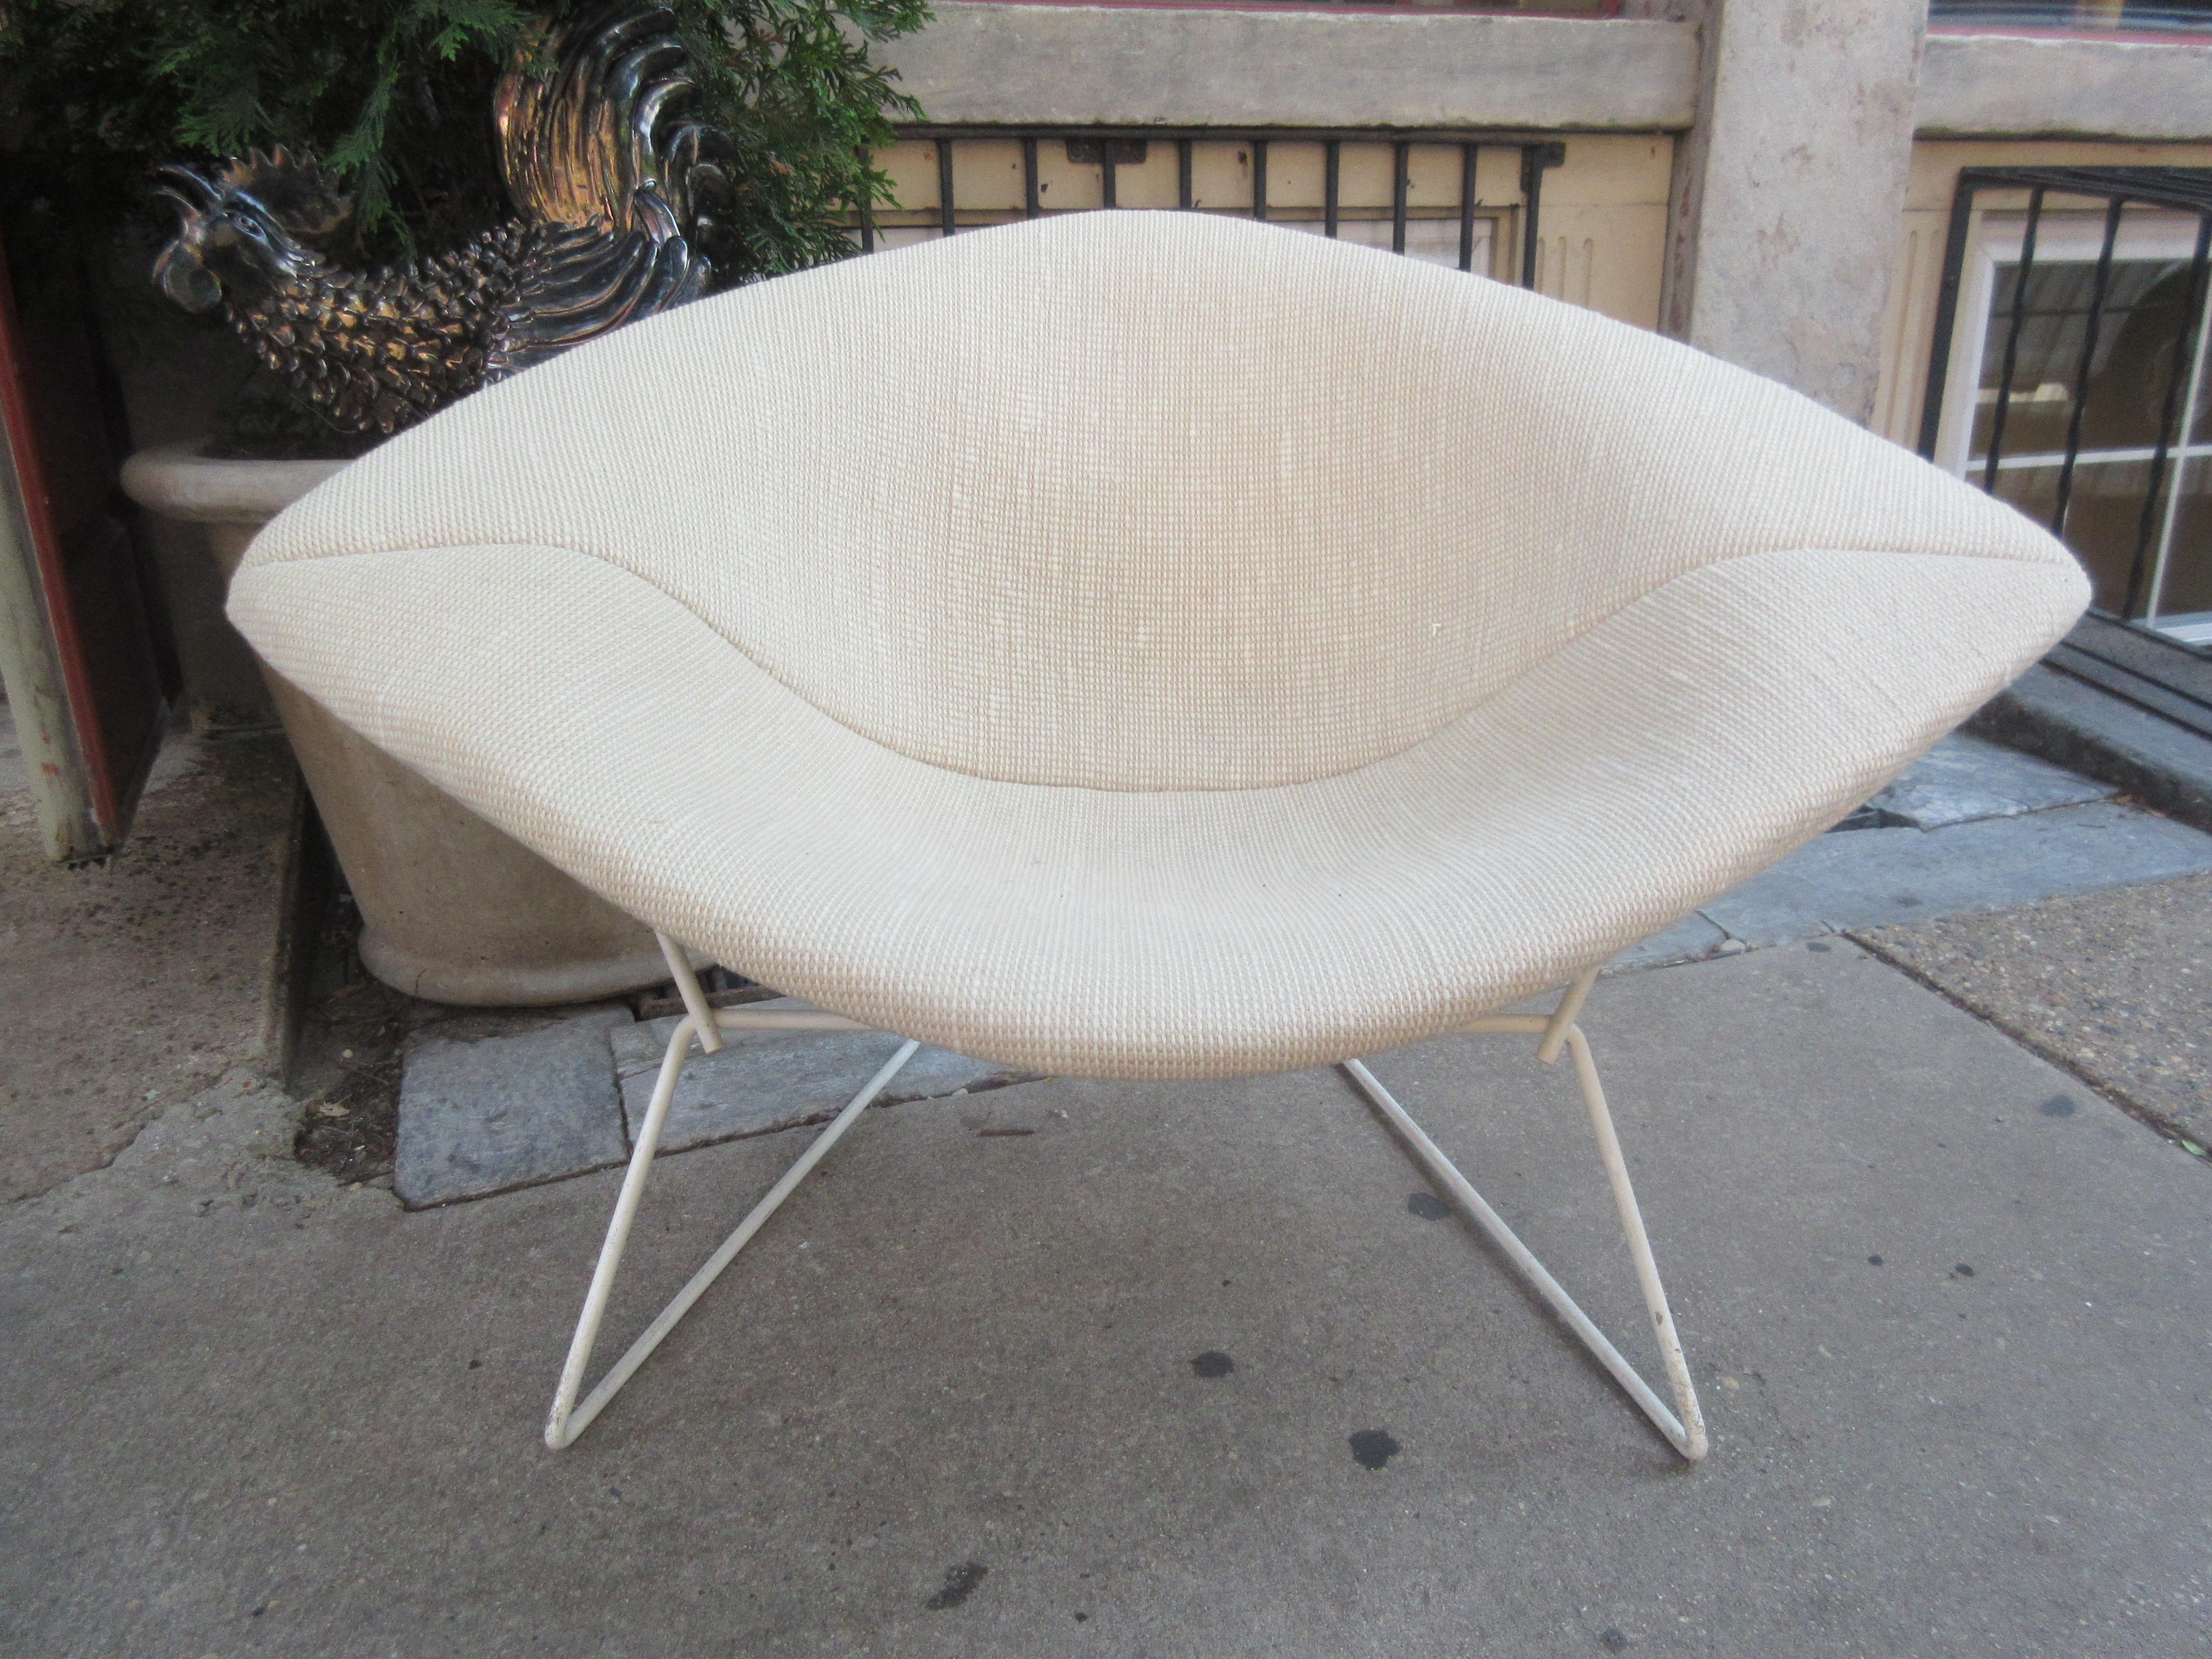 Bertoia Knoll large rocking Diamond chair with white Cato fabric cover. Chair has the rocking feature bushings and is the white latex finish on wire. This chair is no longer in production. Cato cover retains it's Knoll International Label.